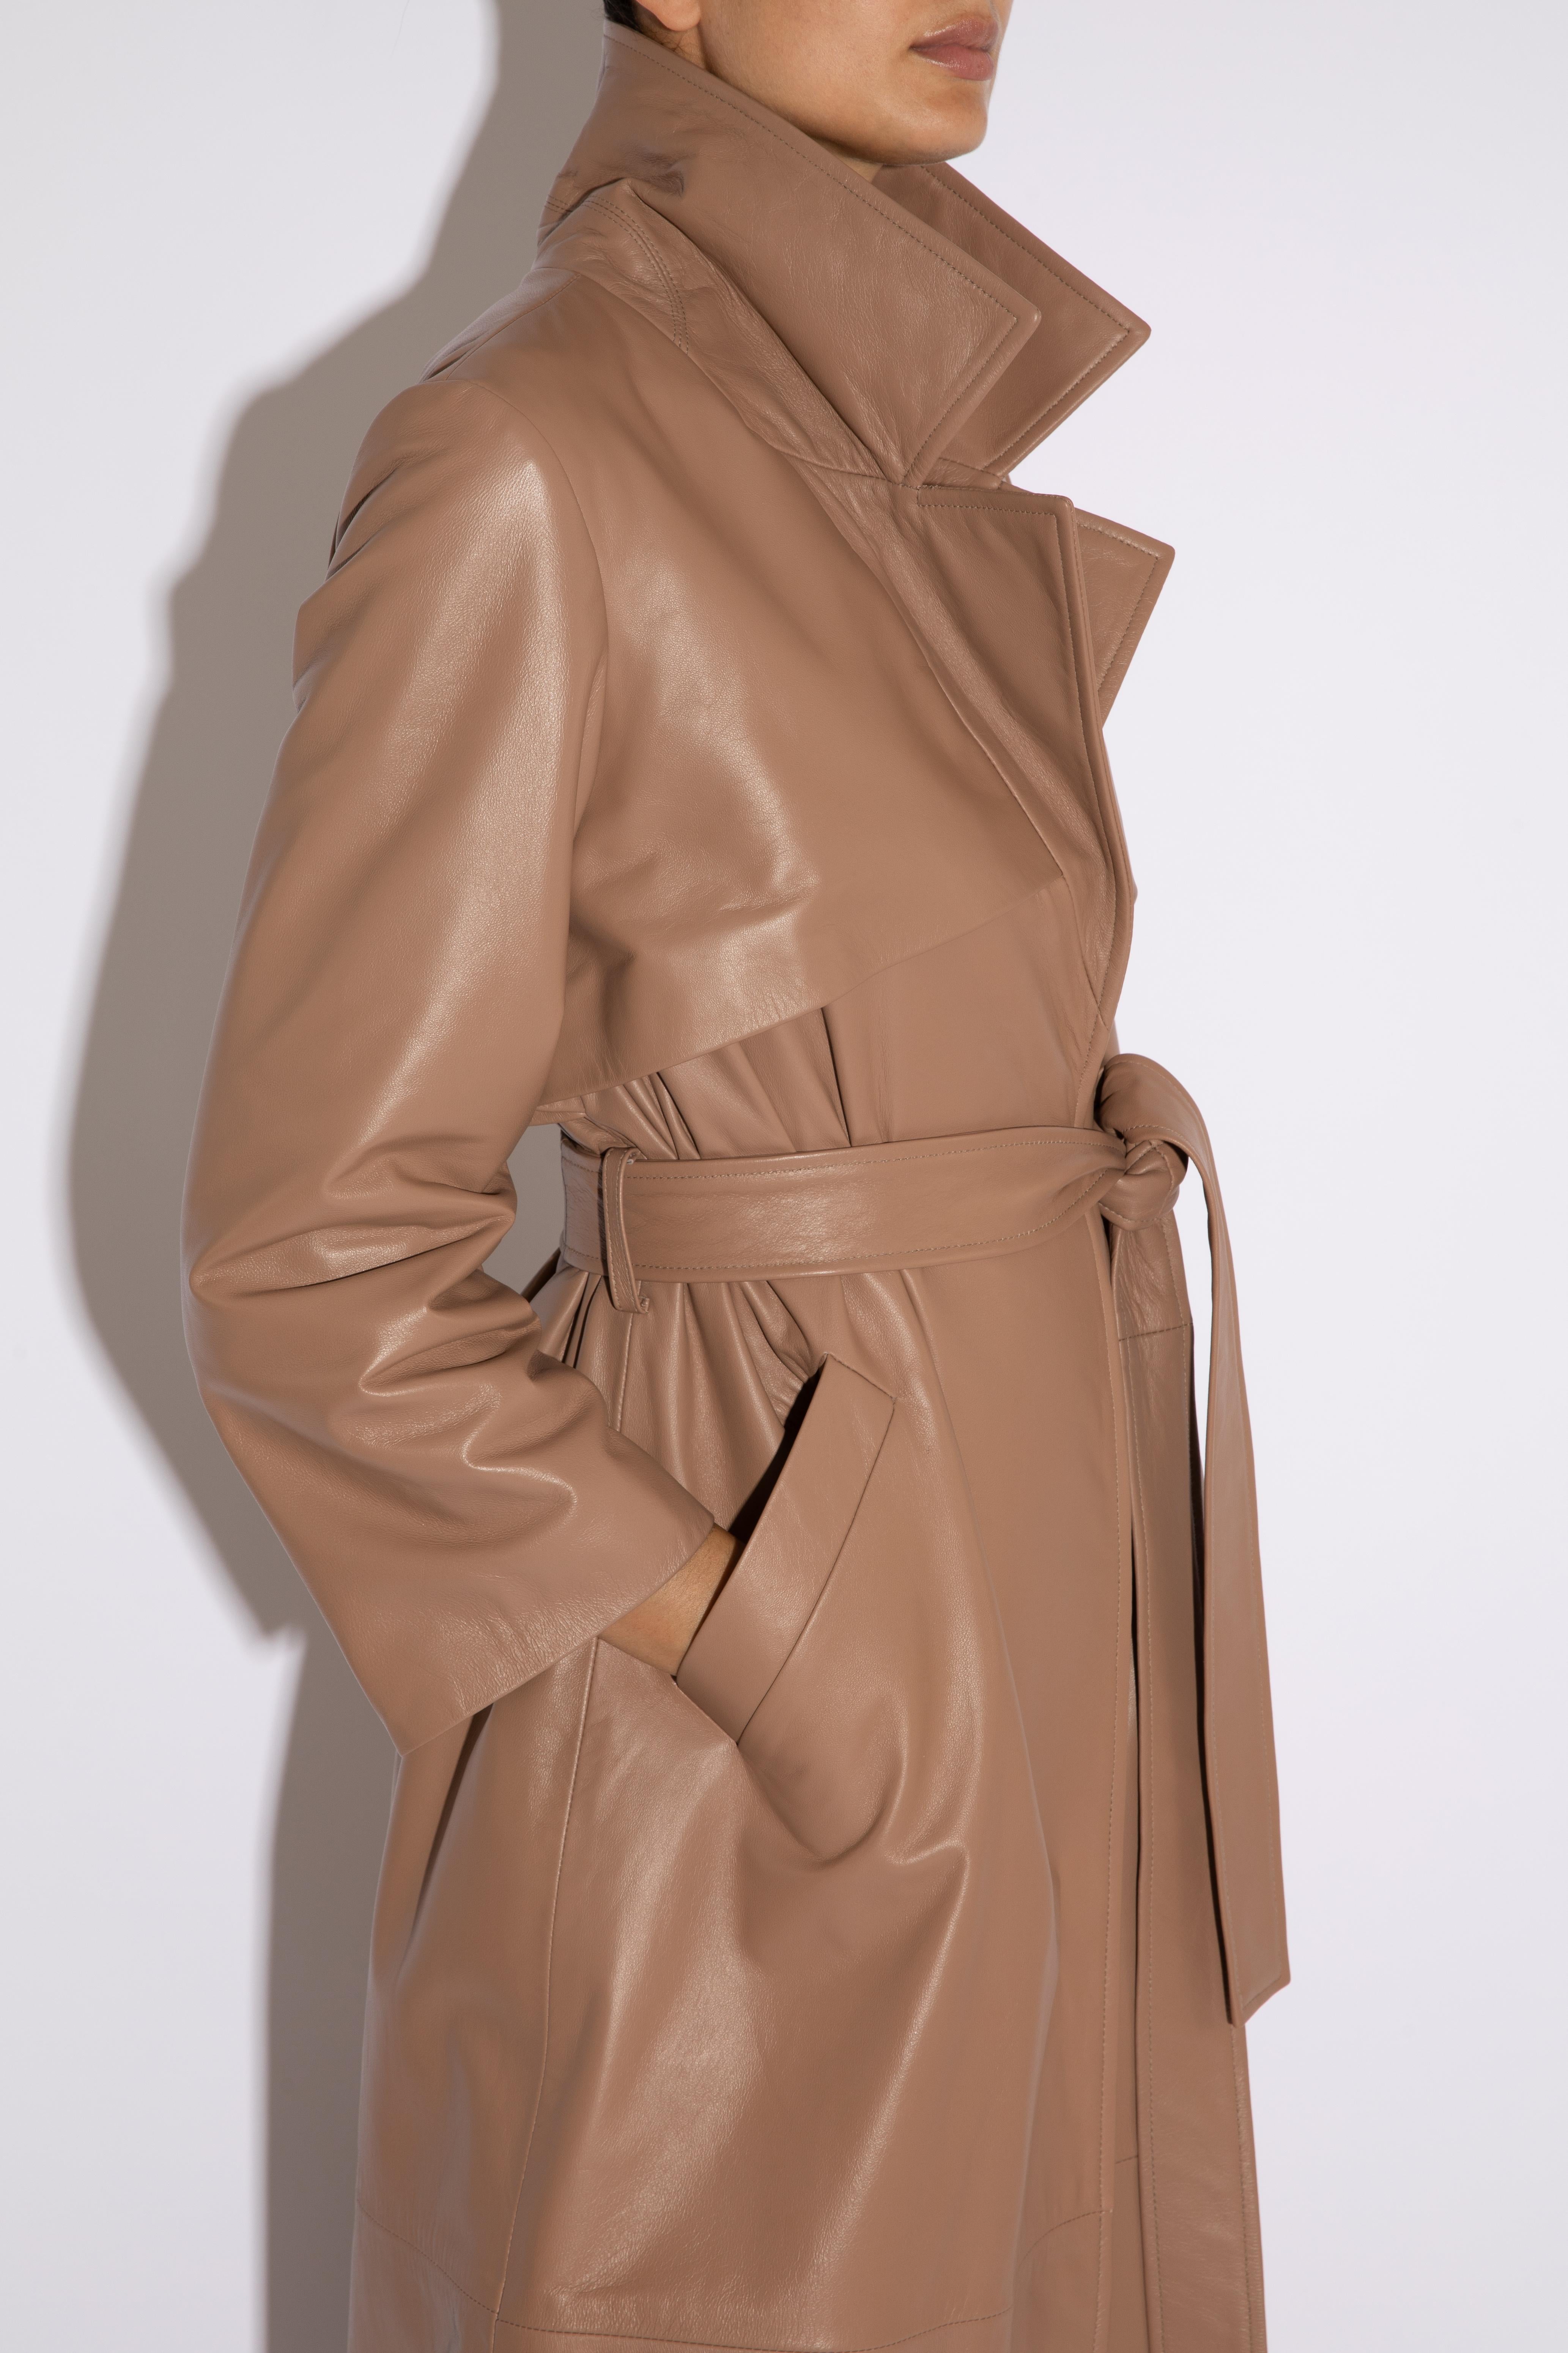 Women's Verheyen London Leather Trench Coat in Taupe Brown - Size uk 8 For Sale